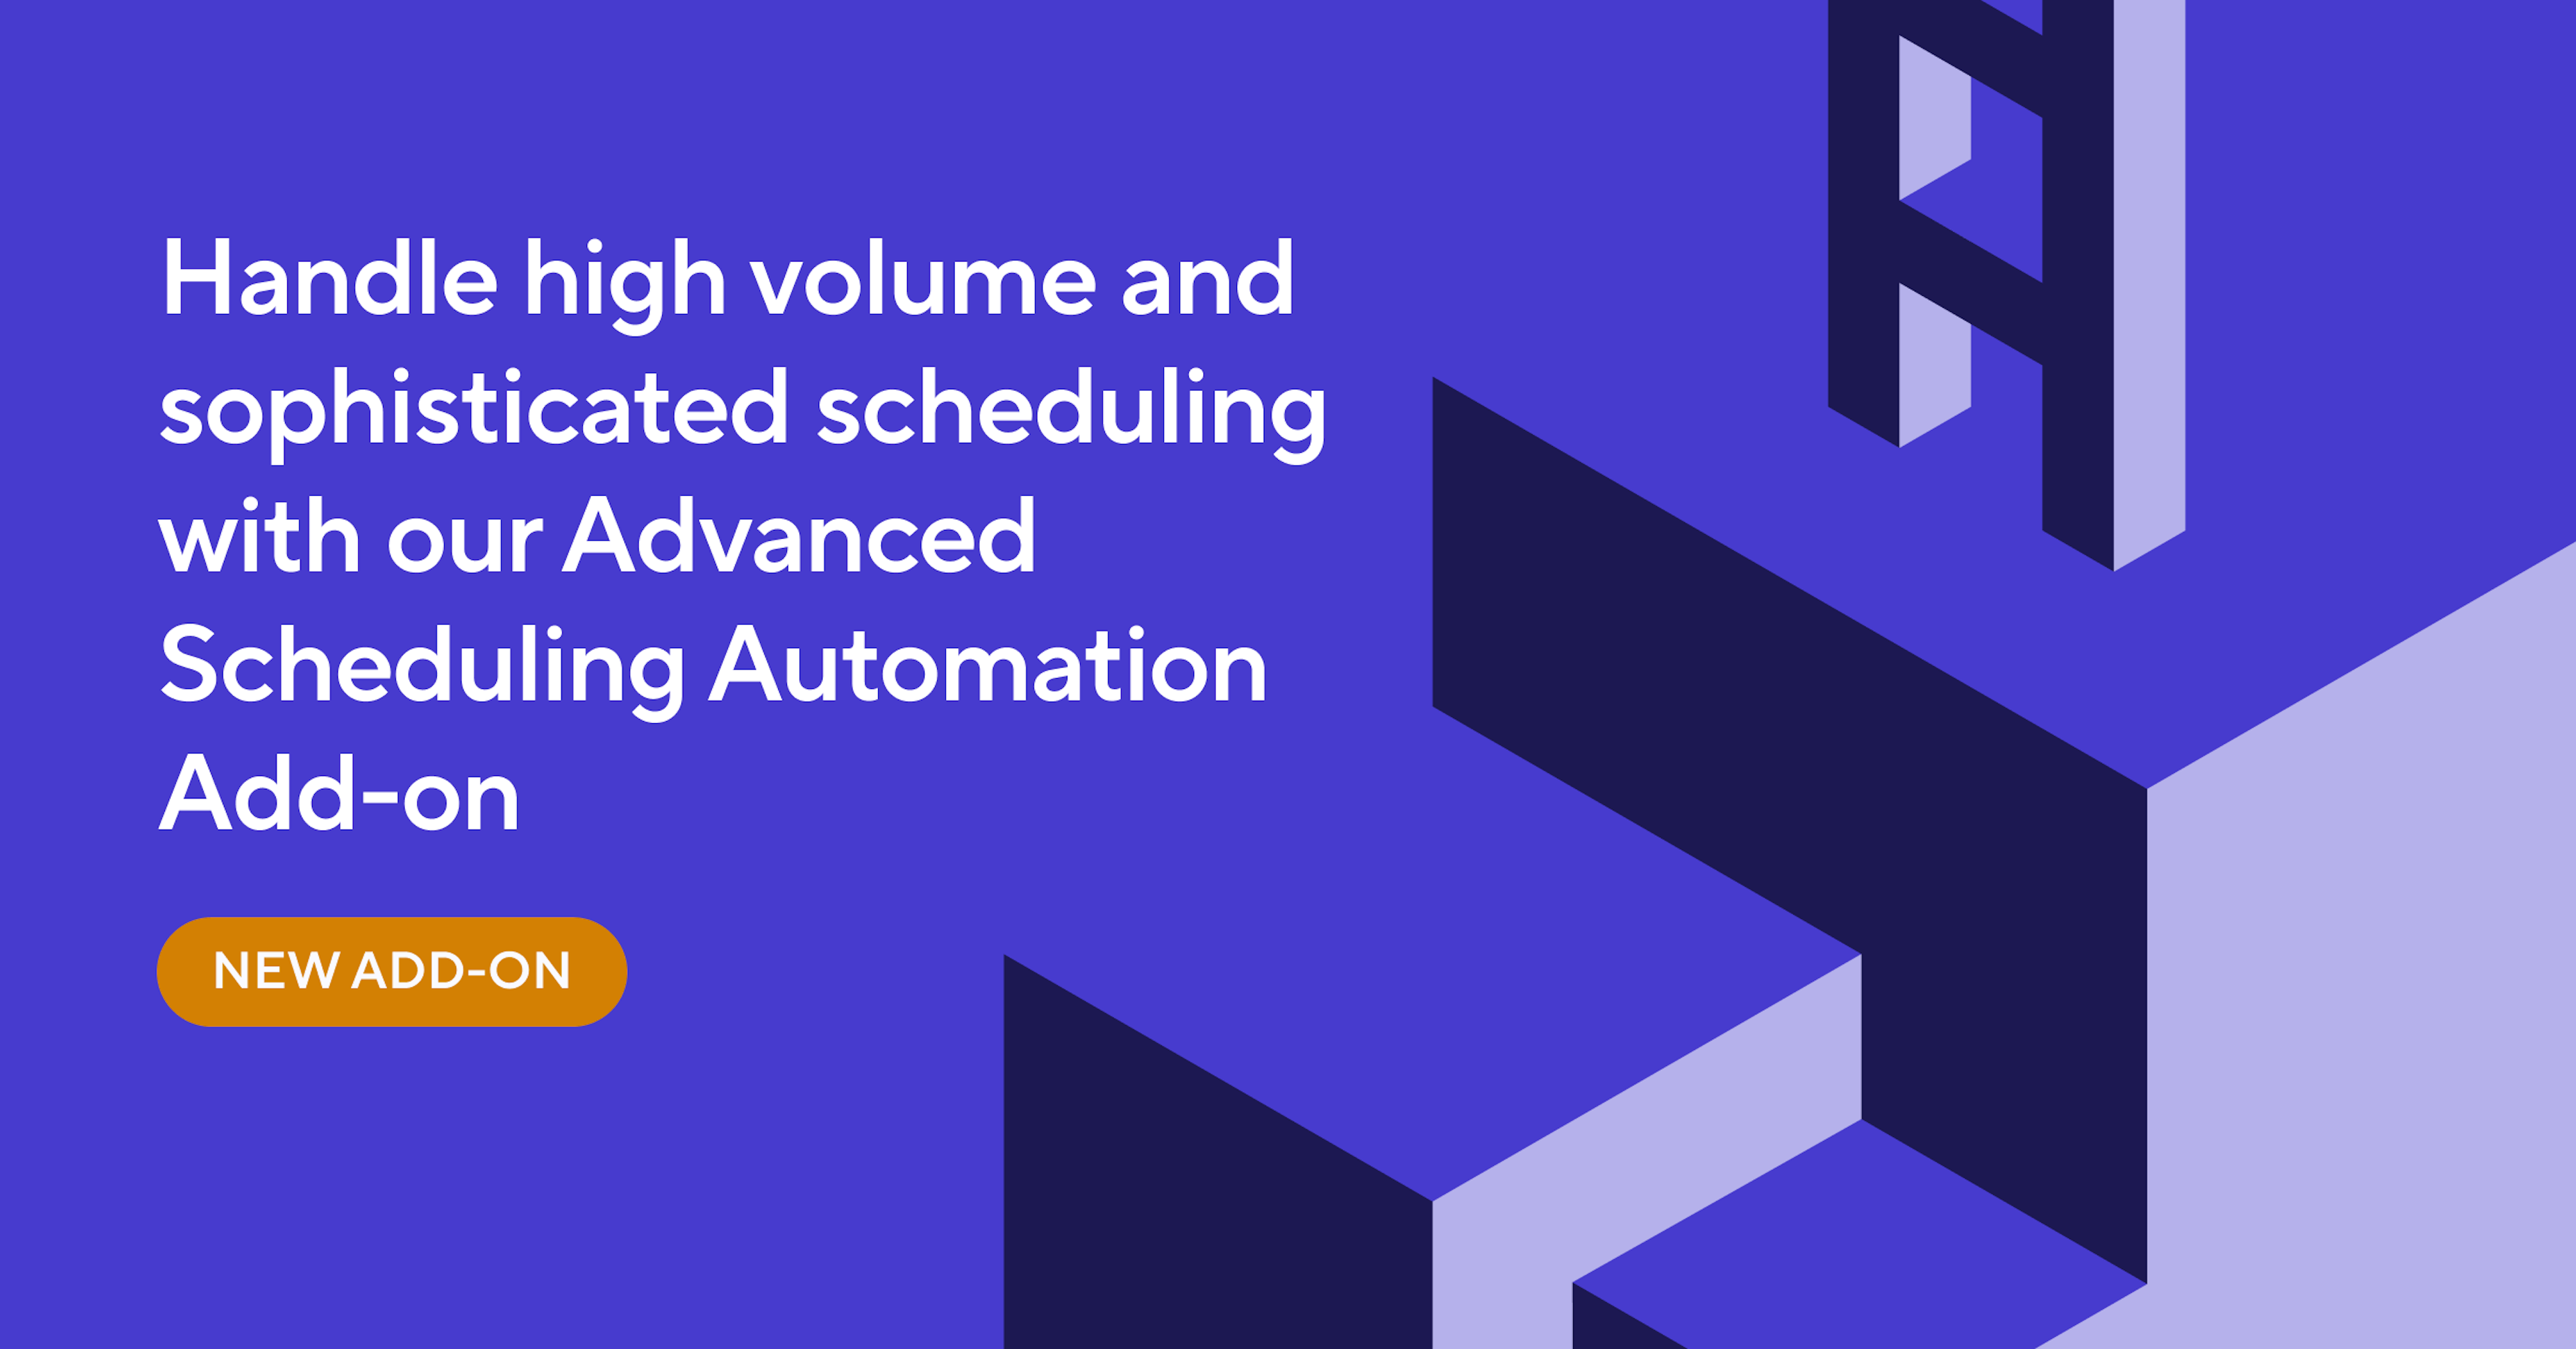 New Add-on: Advanced Scheduling Automation